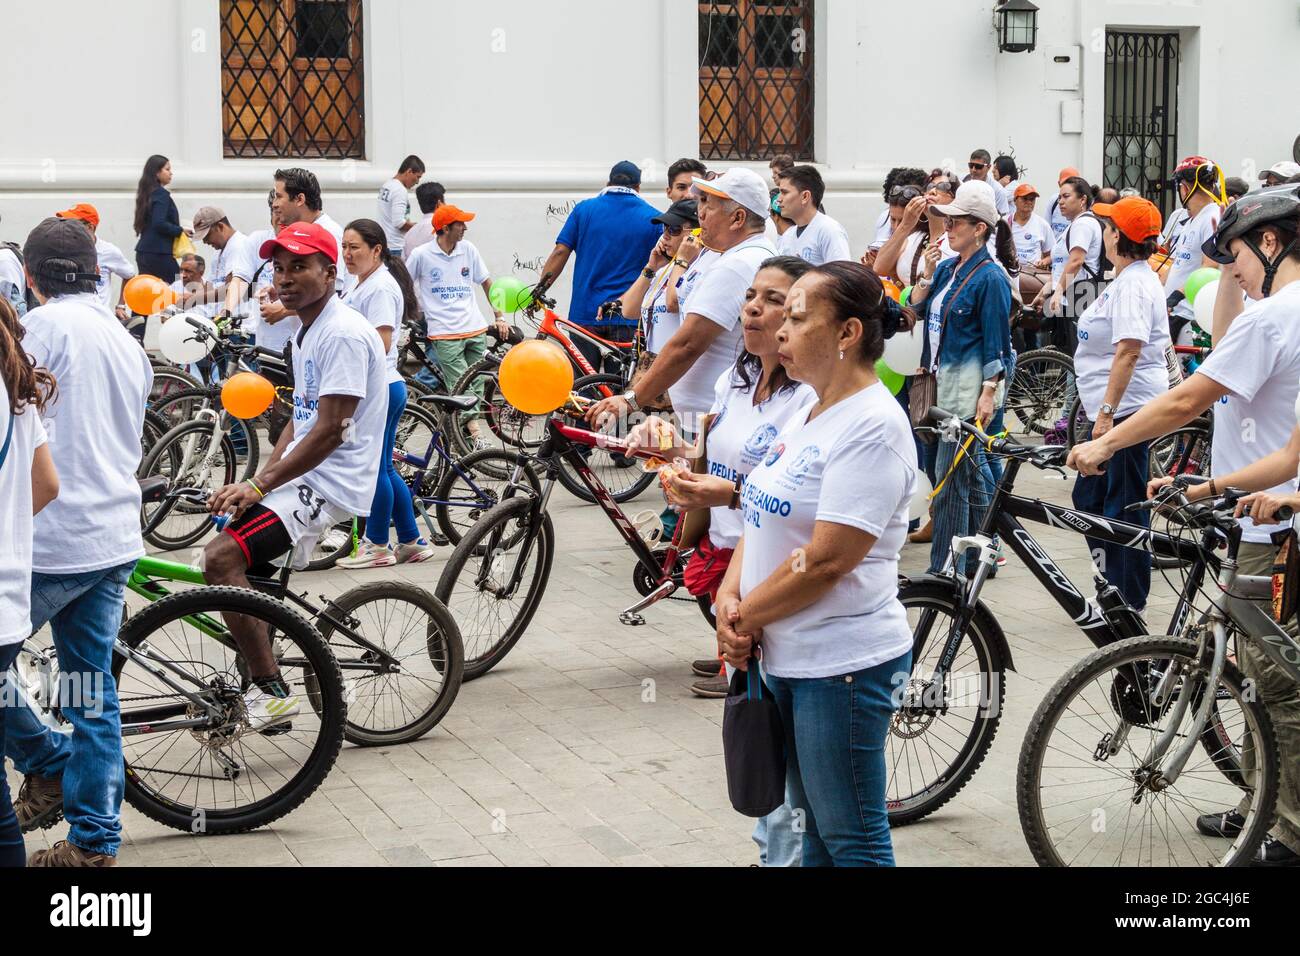 POPAYAN, COLOMBIA - SEPTEMBER 11, 2015: Members of Juntos Pedaleando por la Paz (Together Cycling for the Peace) manifestation in Popayan, Colombia Stock Photo